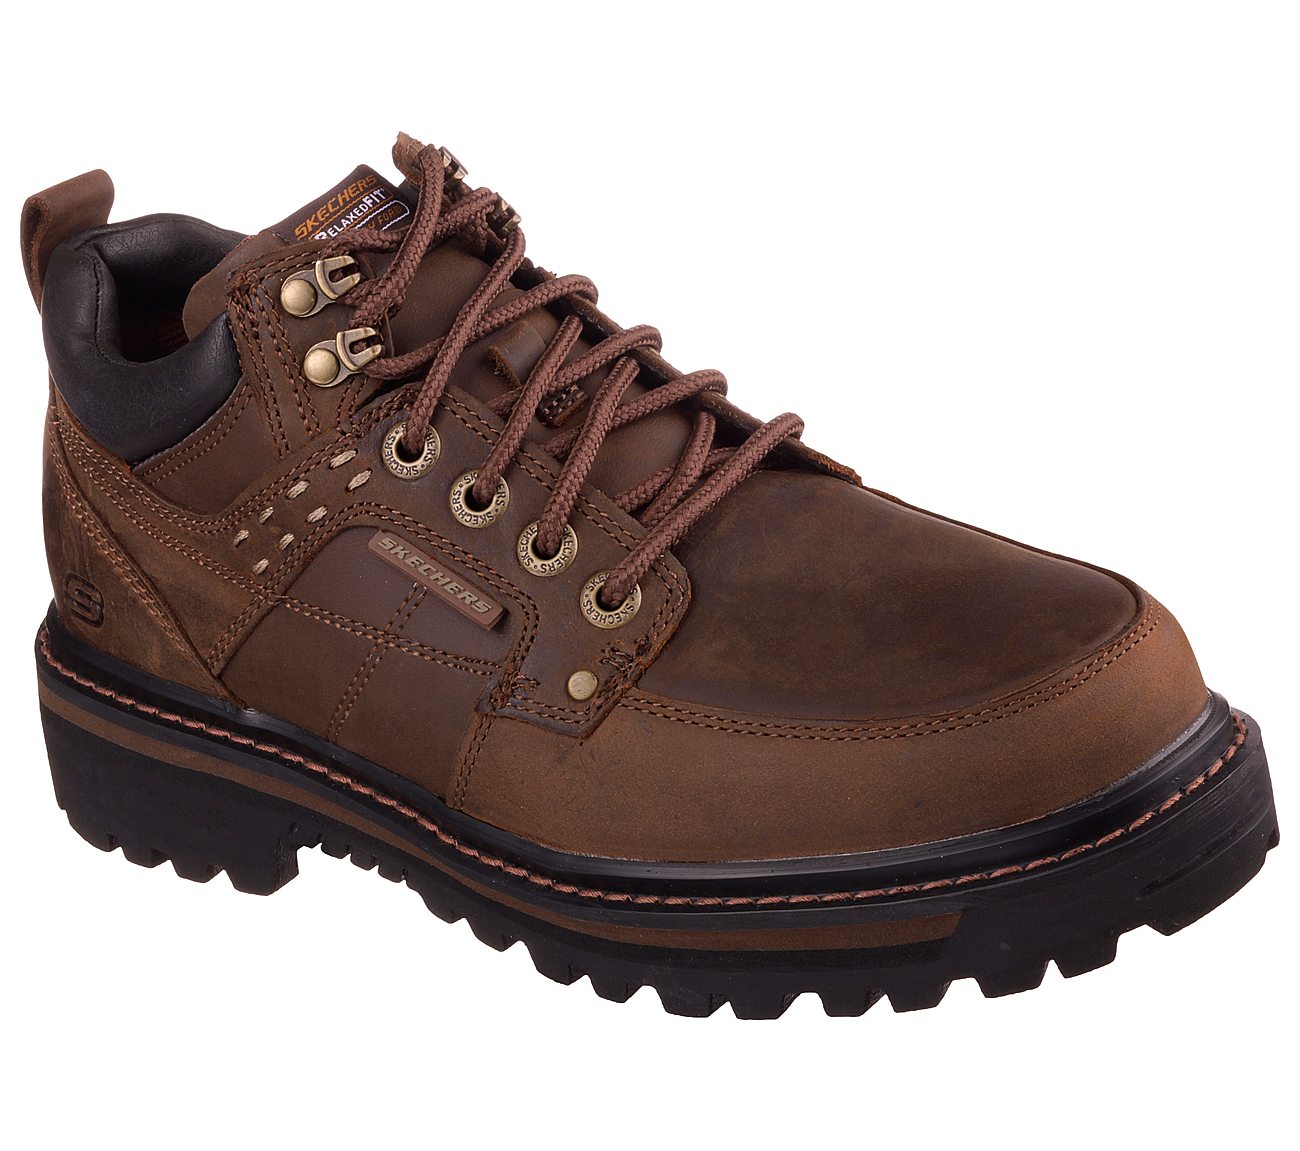 Buy SKECHERS Relaxed Fit: Mariners - Vitor Twenty Five Percent Off Shoes